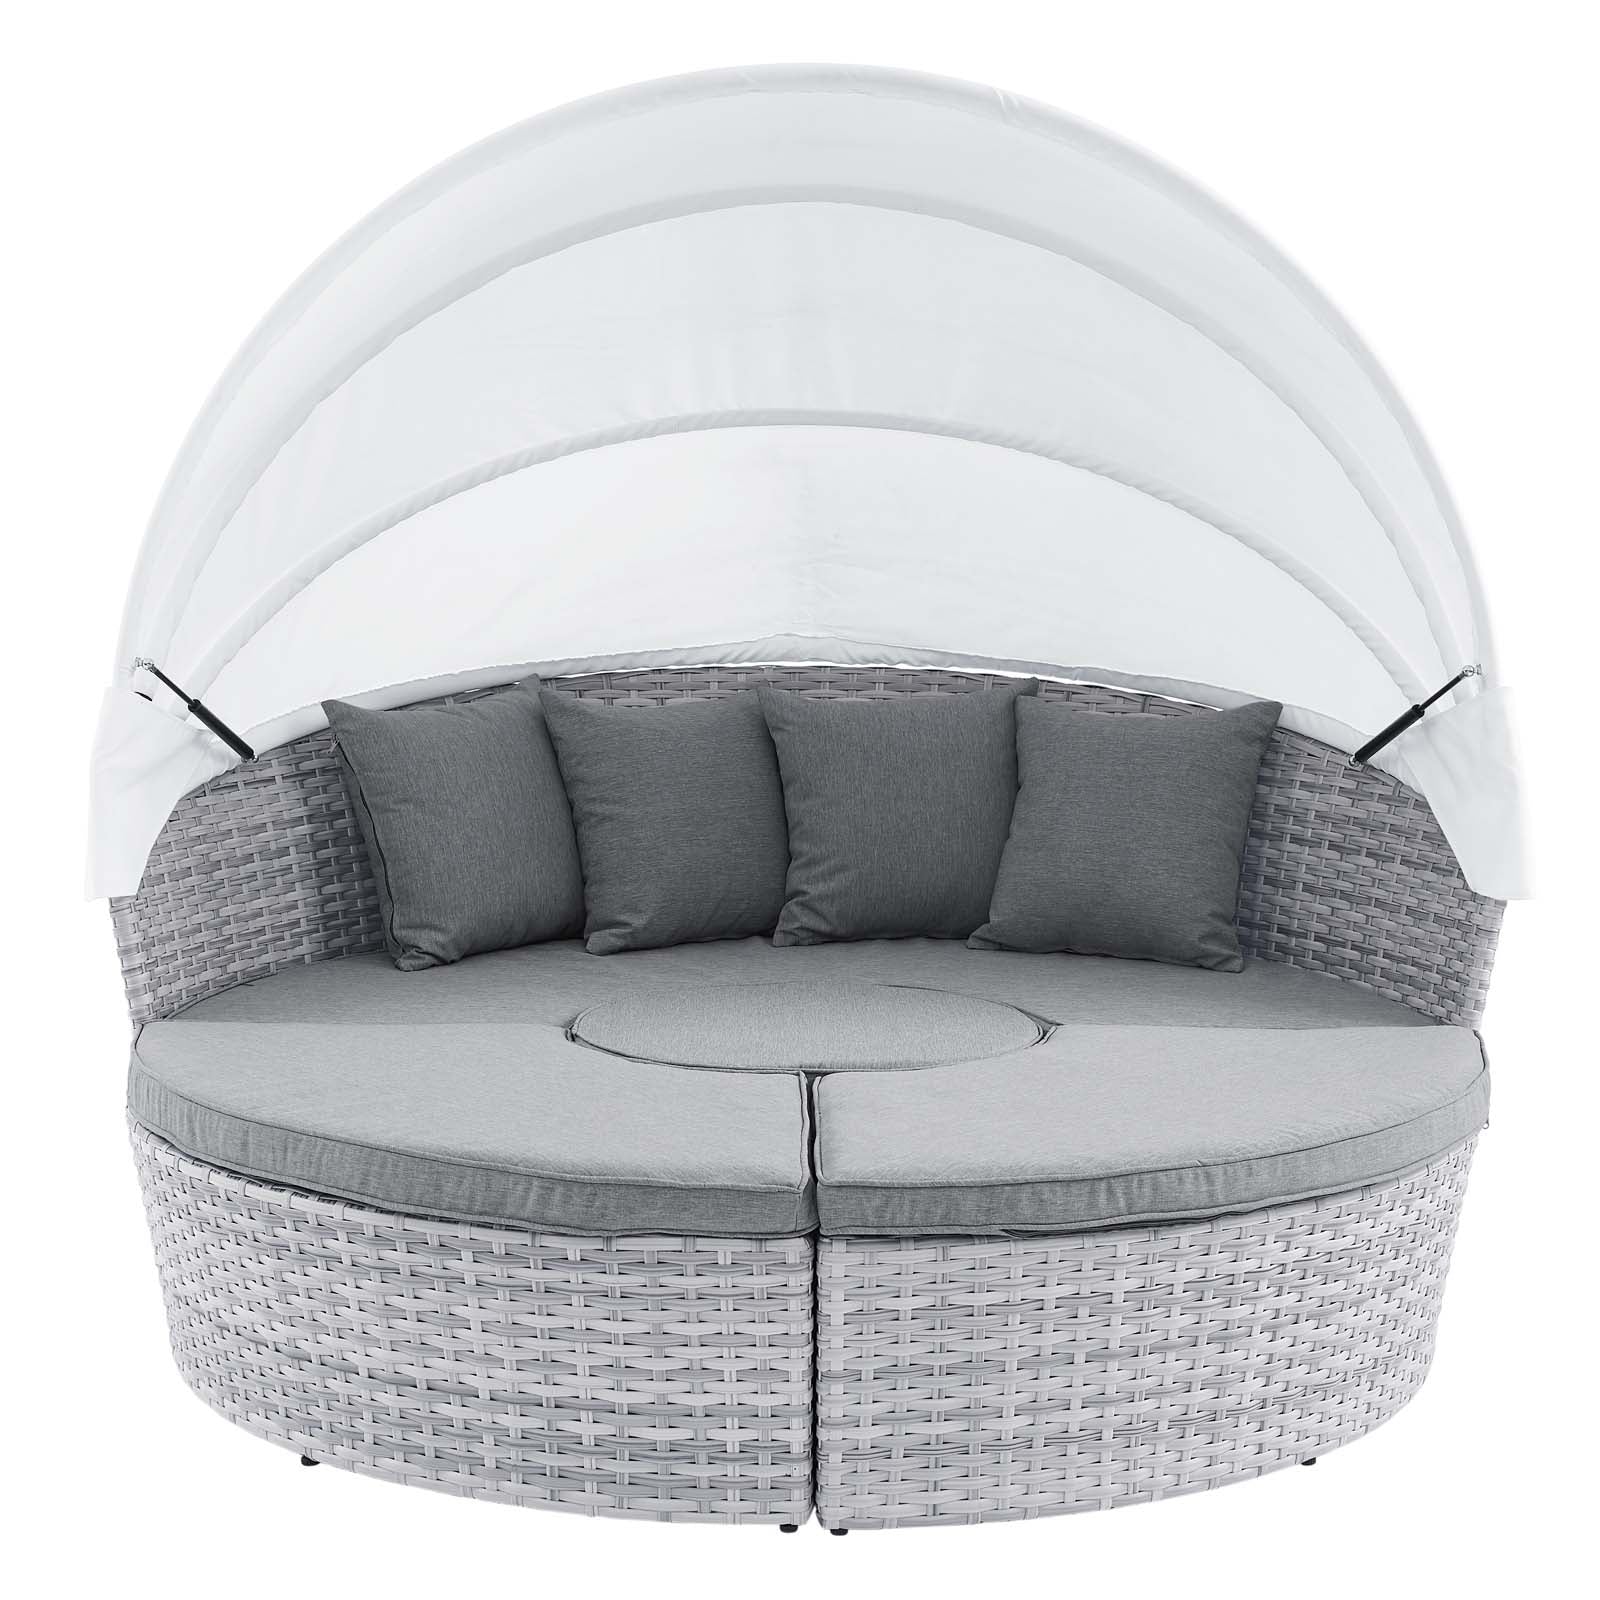 Modway Patio Daybeds - Scottsdale Canopy Outdoor Patio Daybed Light Gray